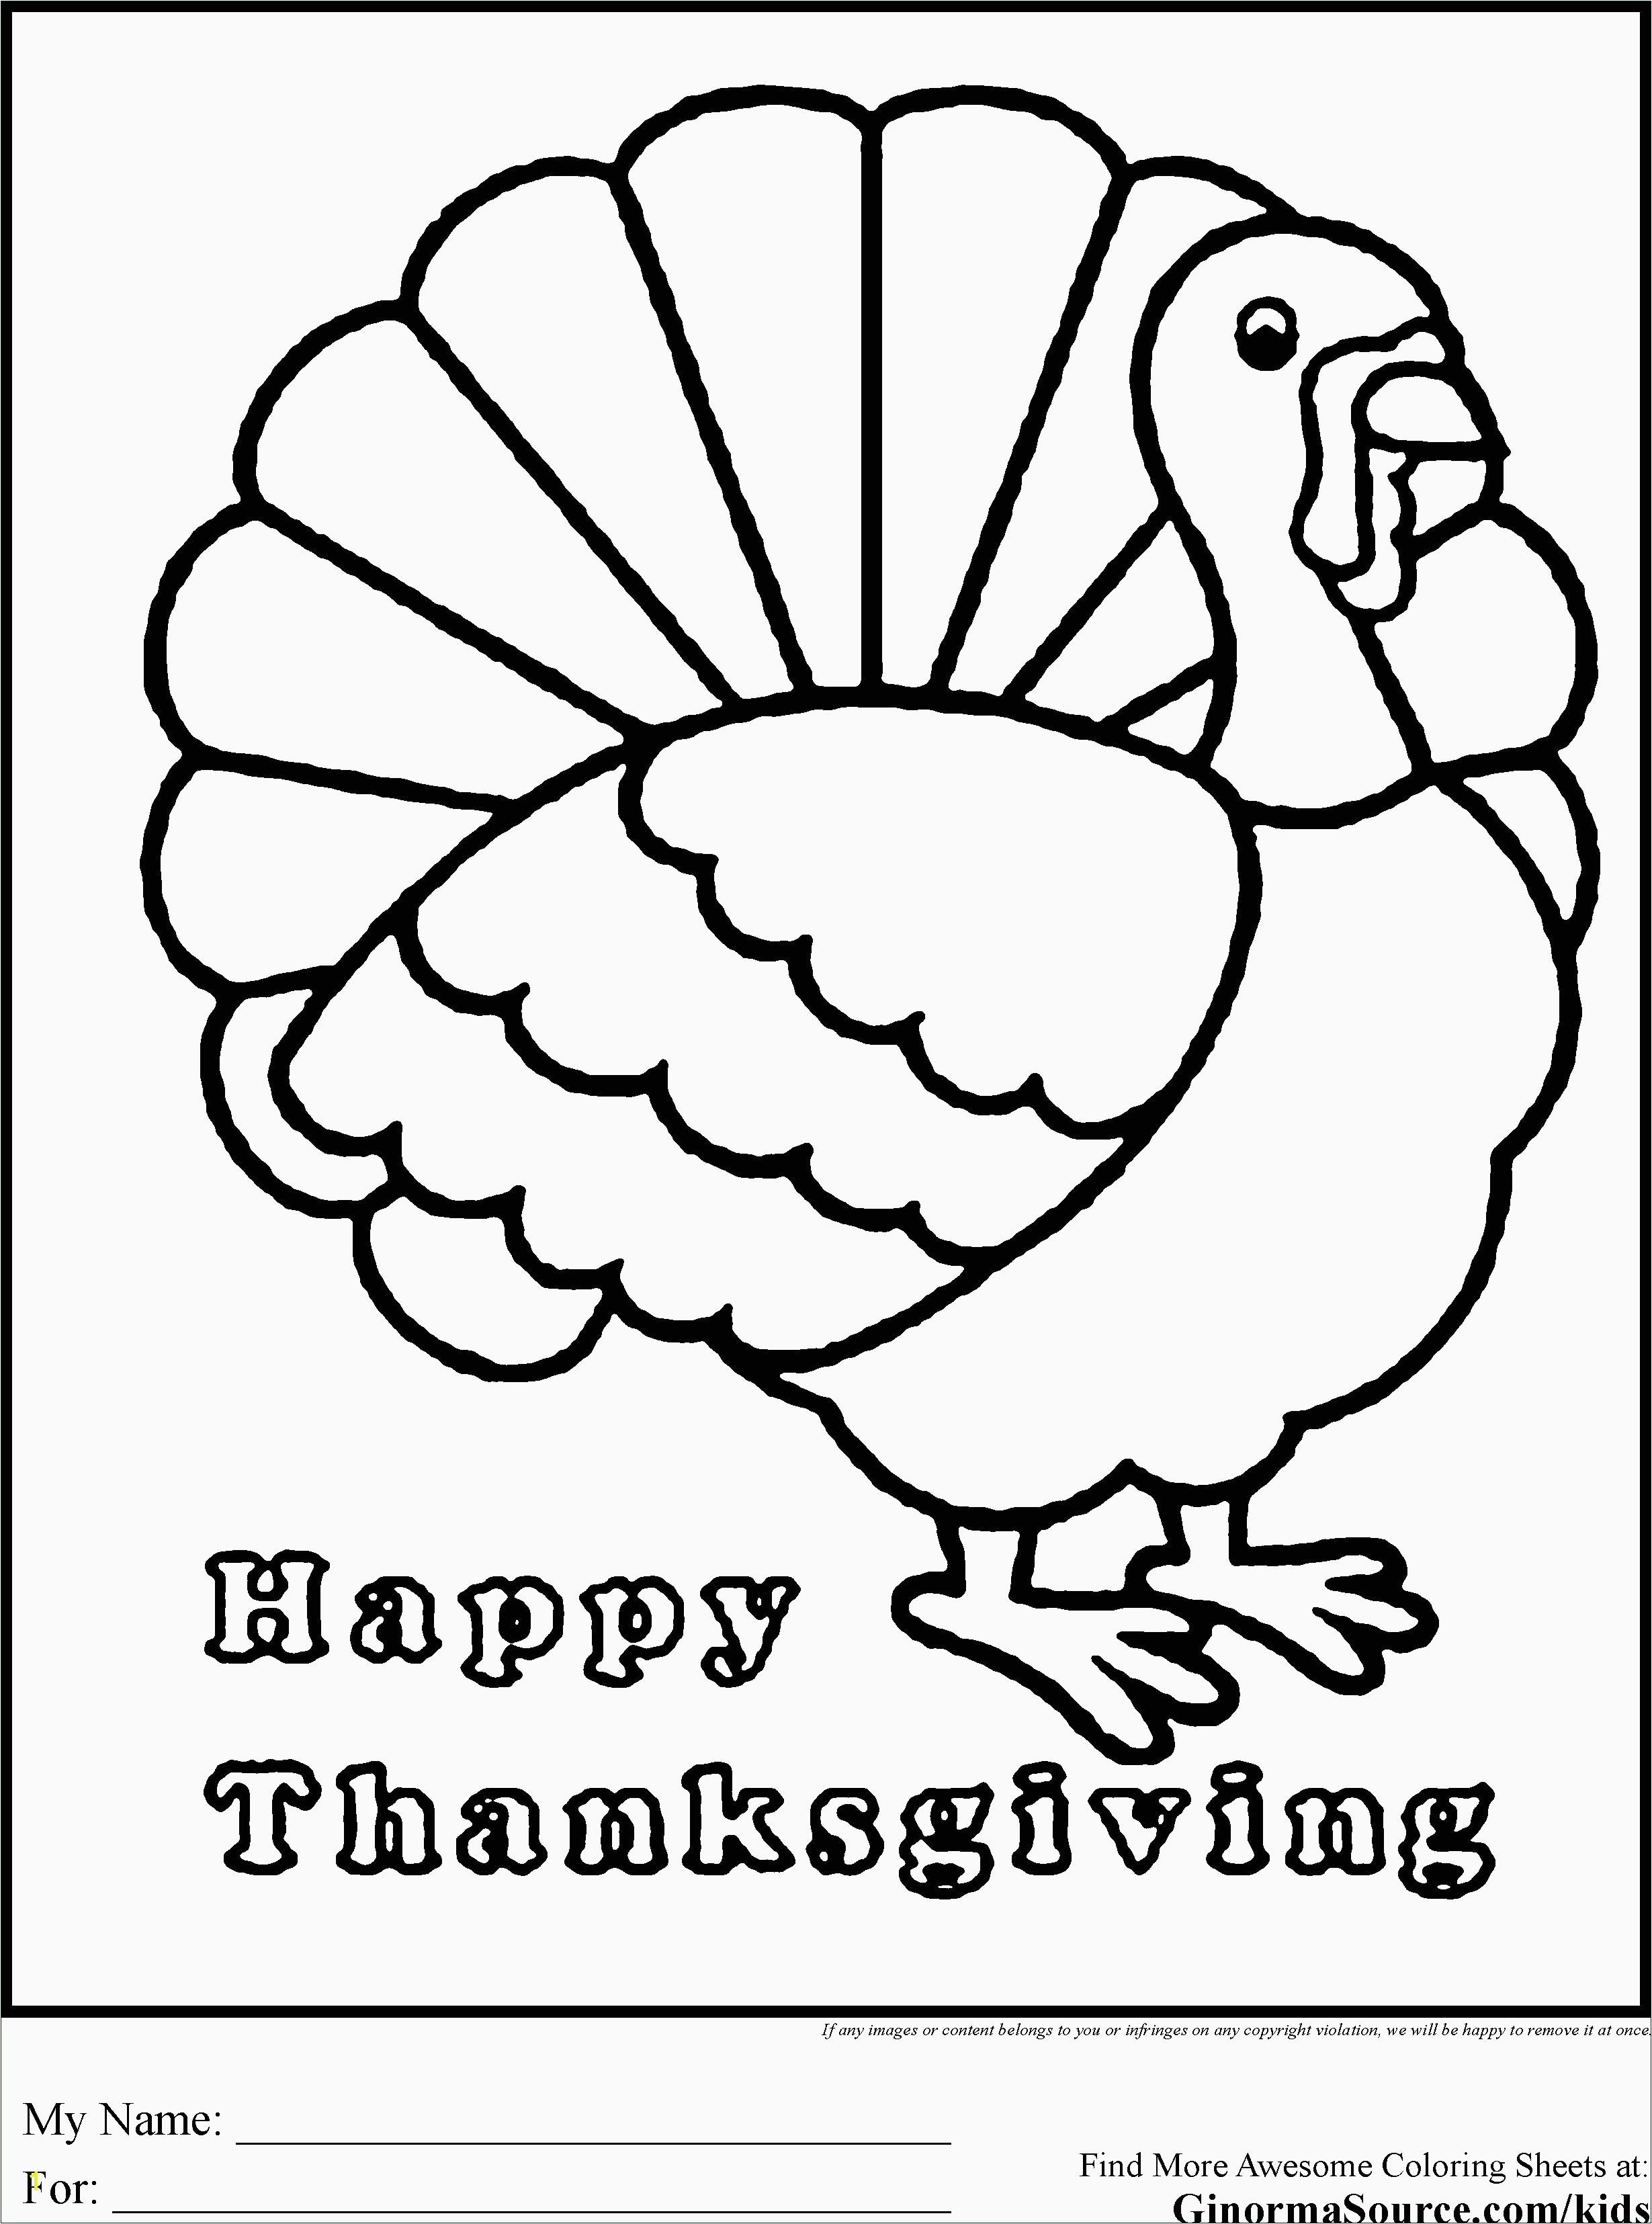 Color Sheet for Thanksgiving New Printable Coloring Pages for Kids Best Coloring Printables 0d Types